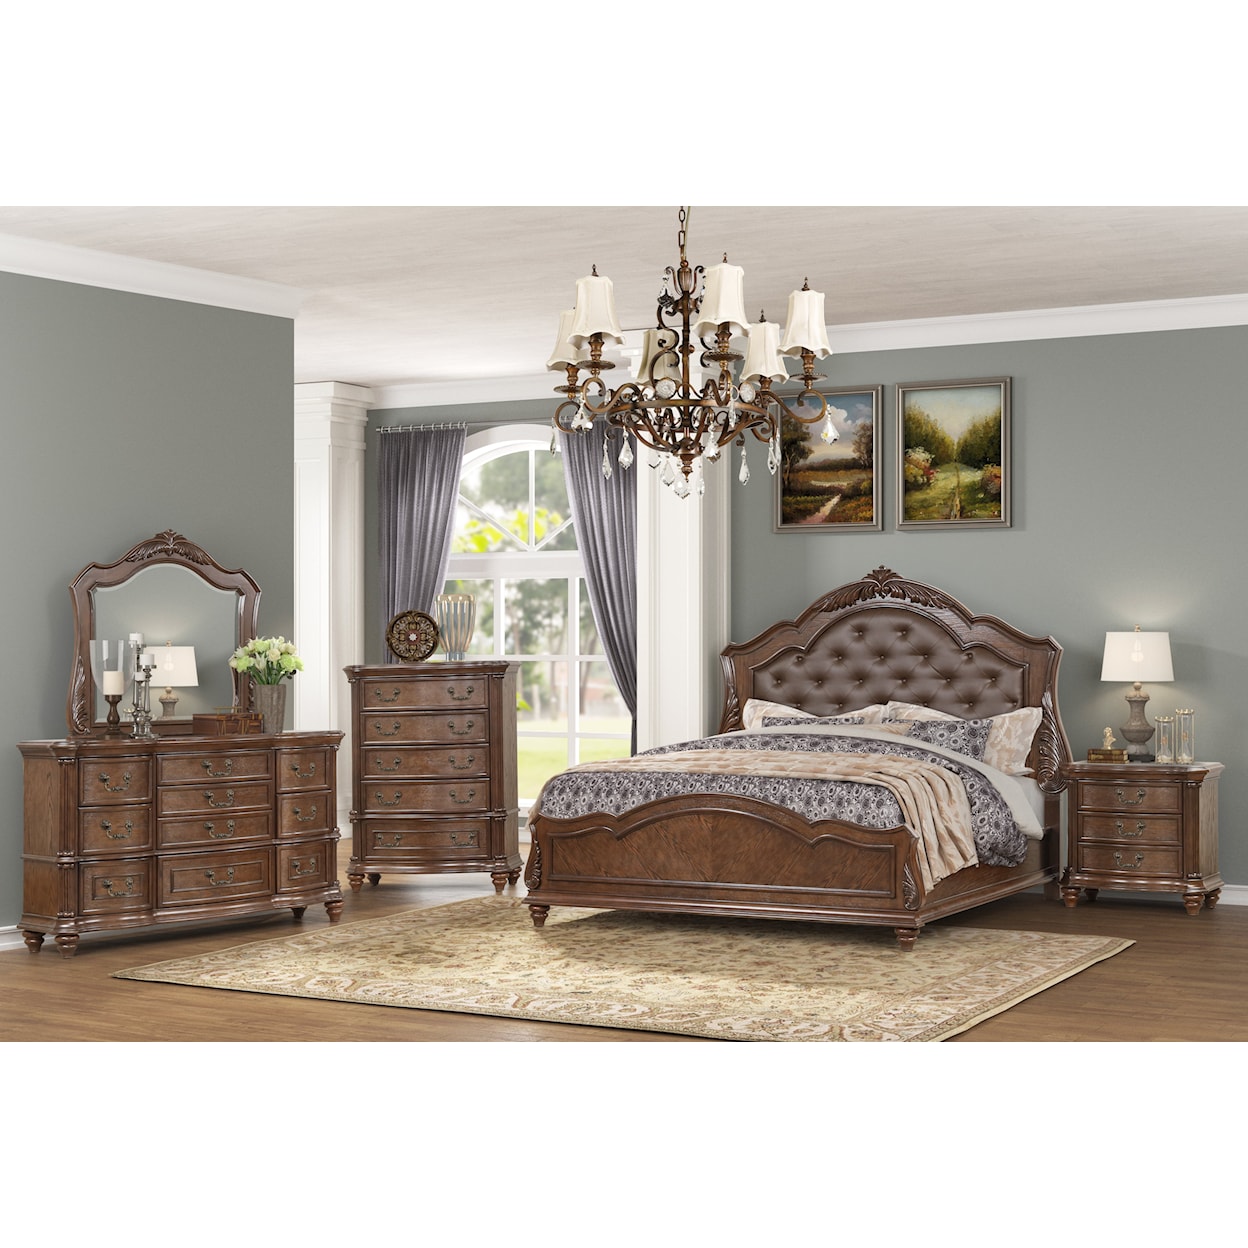 New Classic Roma King Bedroom Group